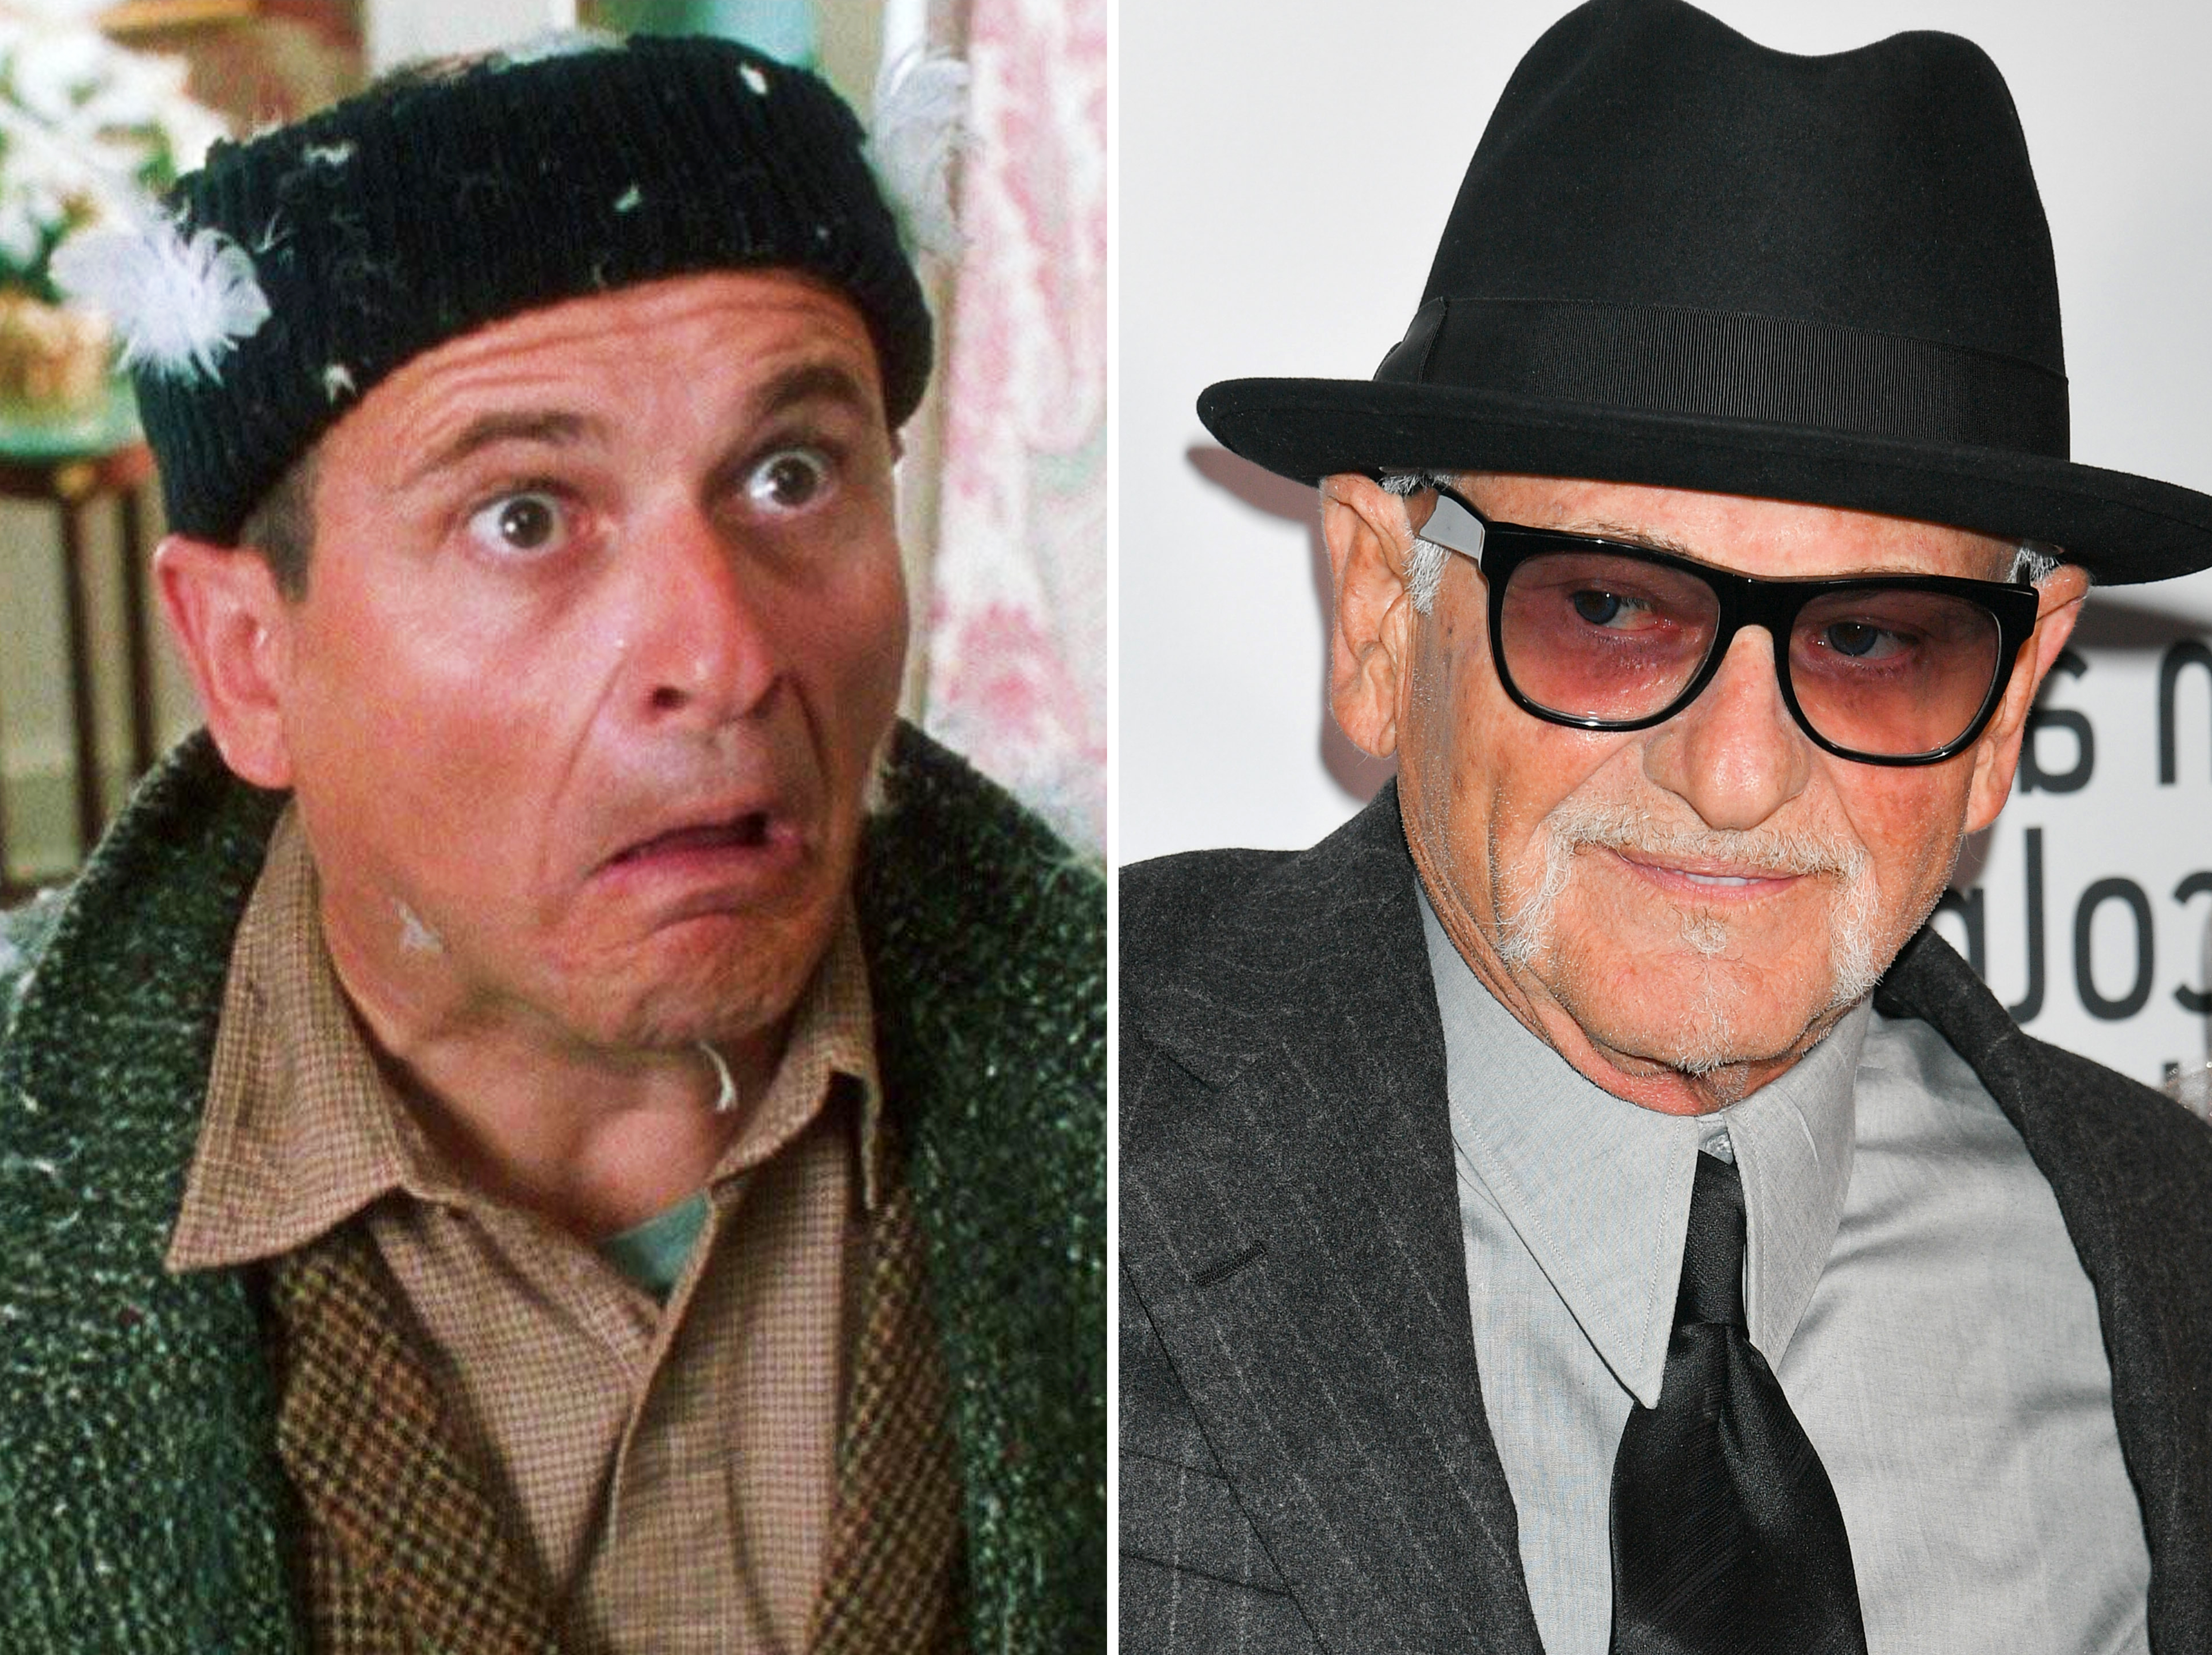 Joe Pesci as Harry Lime in "Home Alone,"  1990 | Joe Pesci at the 57th New York Film Festival in New York City on September 27, 2019 | Sources: Facebook/Home Alone | Getty Images